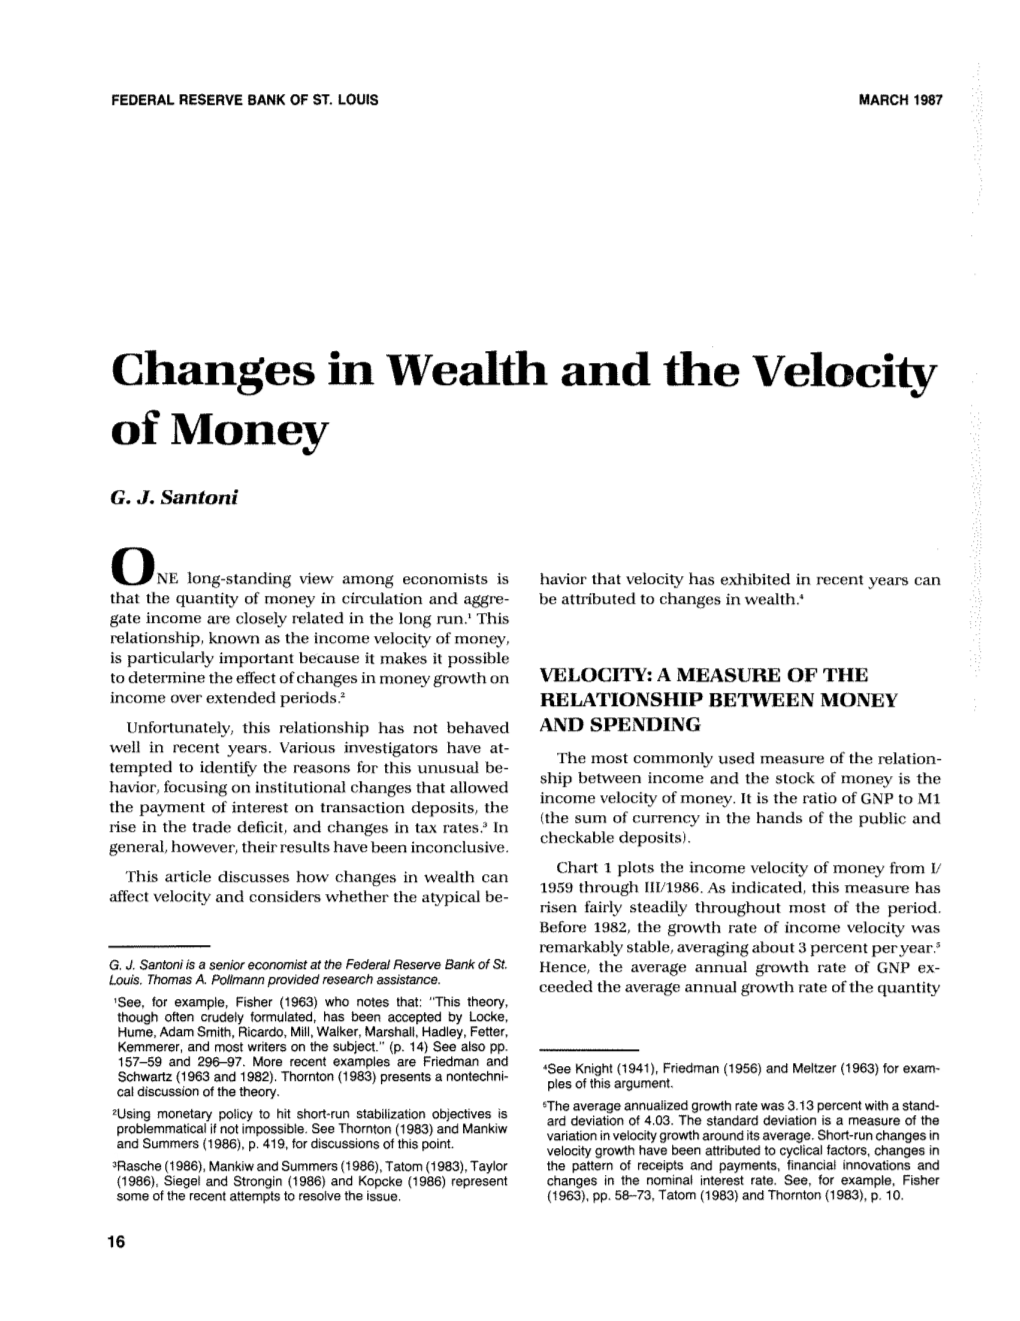 Changes in Wealth and the Velocity of Money